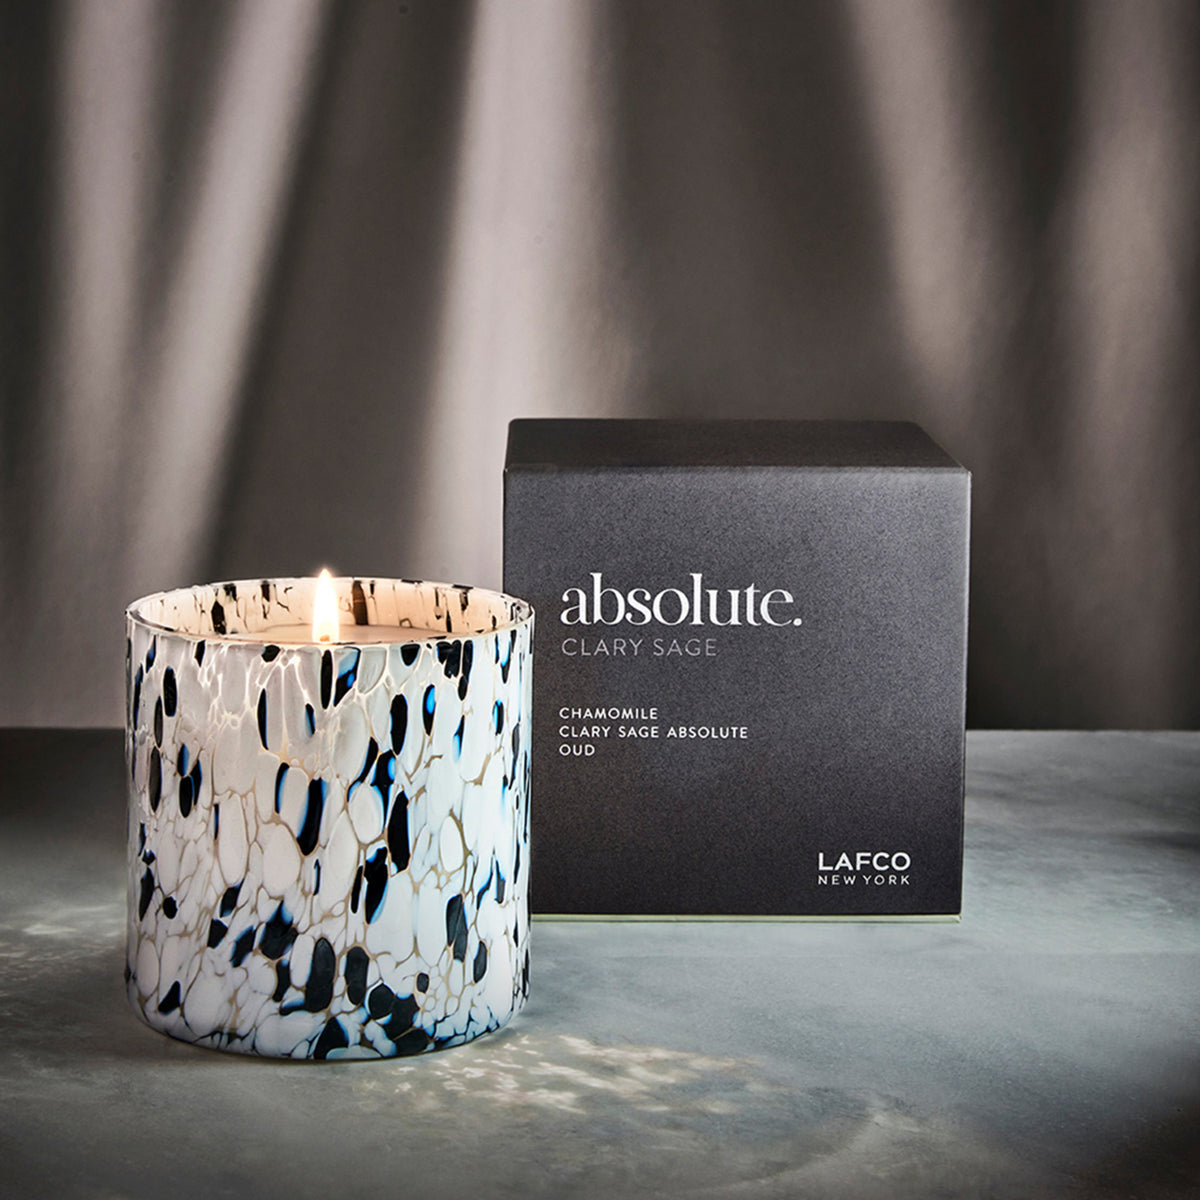 Lafco Absolute Clary Sage Candle .